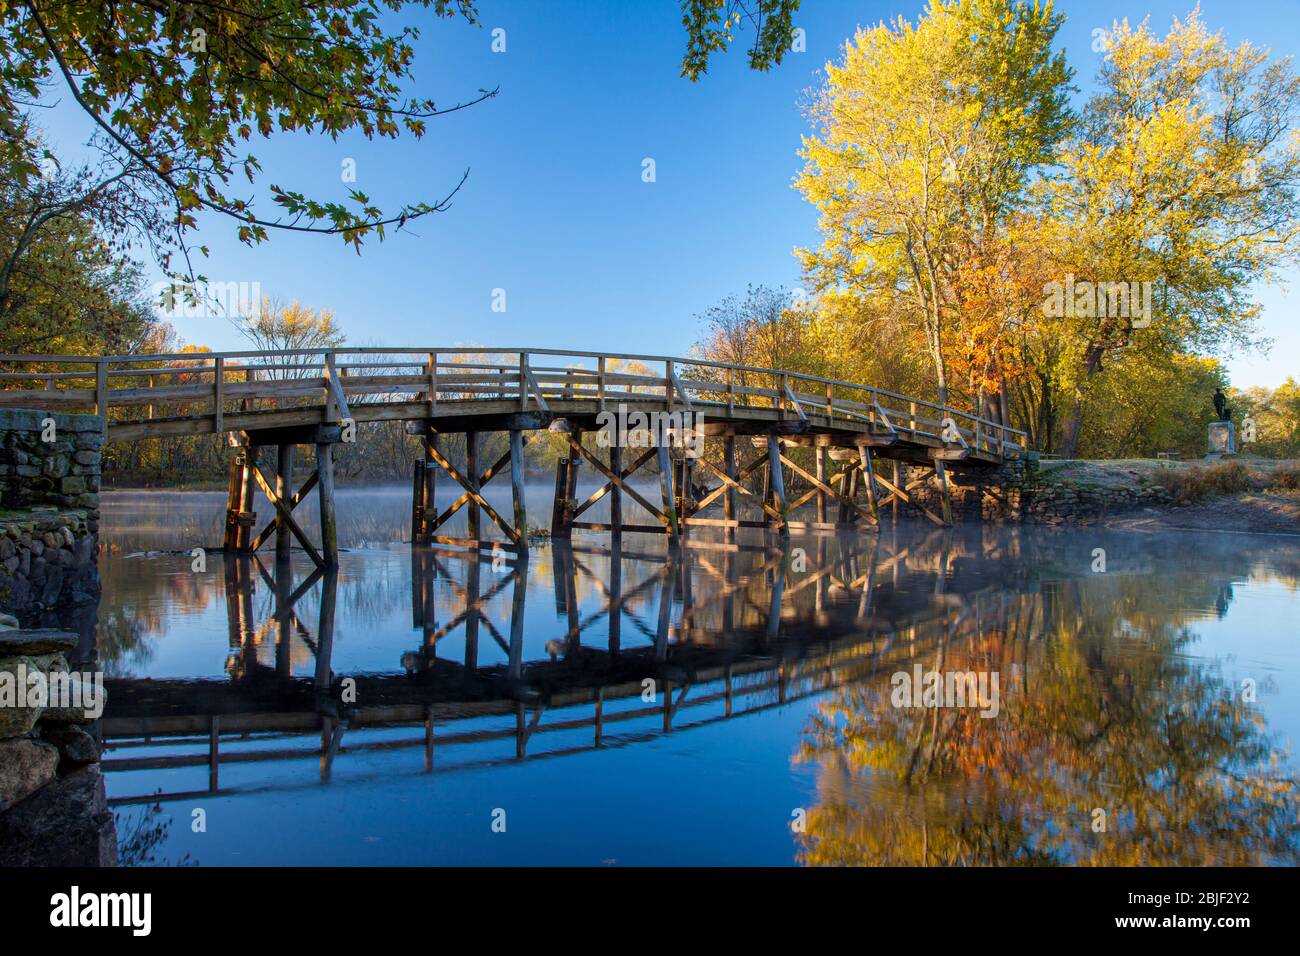 Autumn color in the maple trees at dawn over the Old North Bridge, Concord, Massachusetts, USA Stock Photo